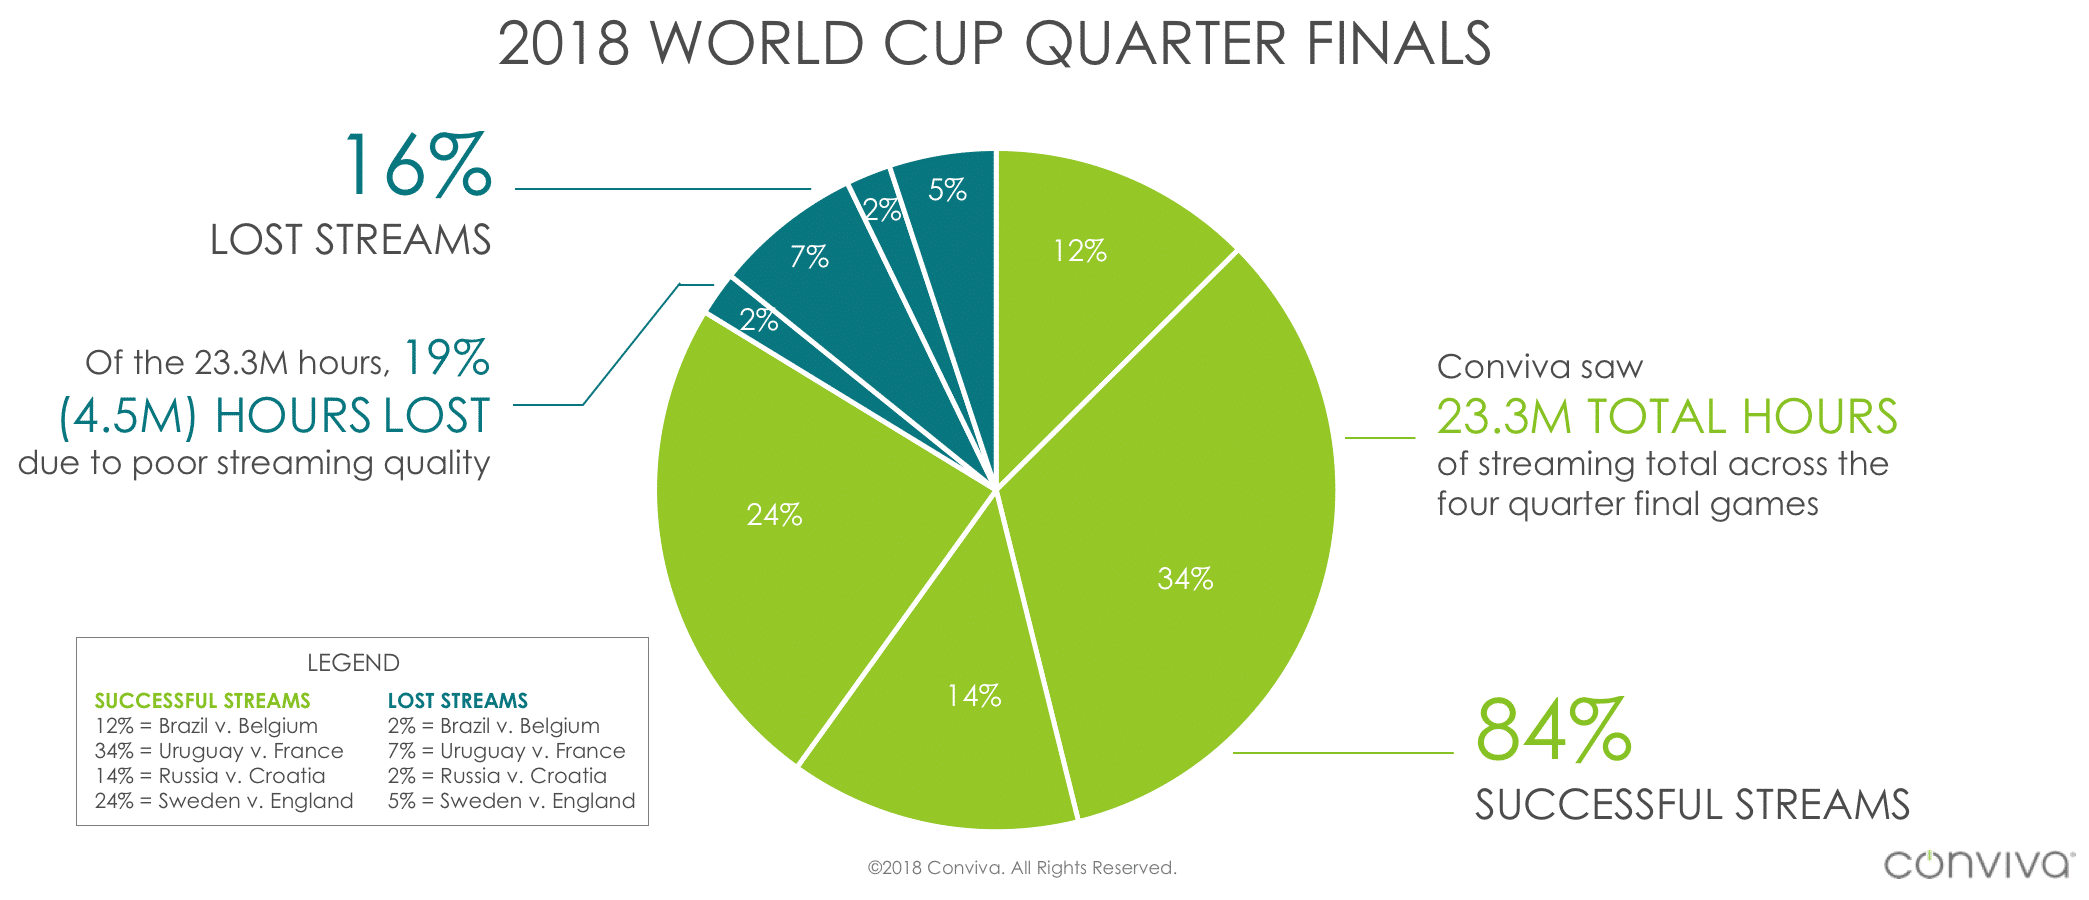 2018's World Cup Quarter Final Pie Chart Audience Data By Conviva Data Insights